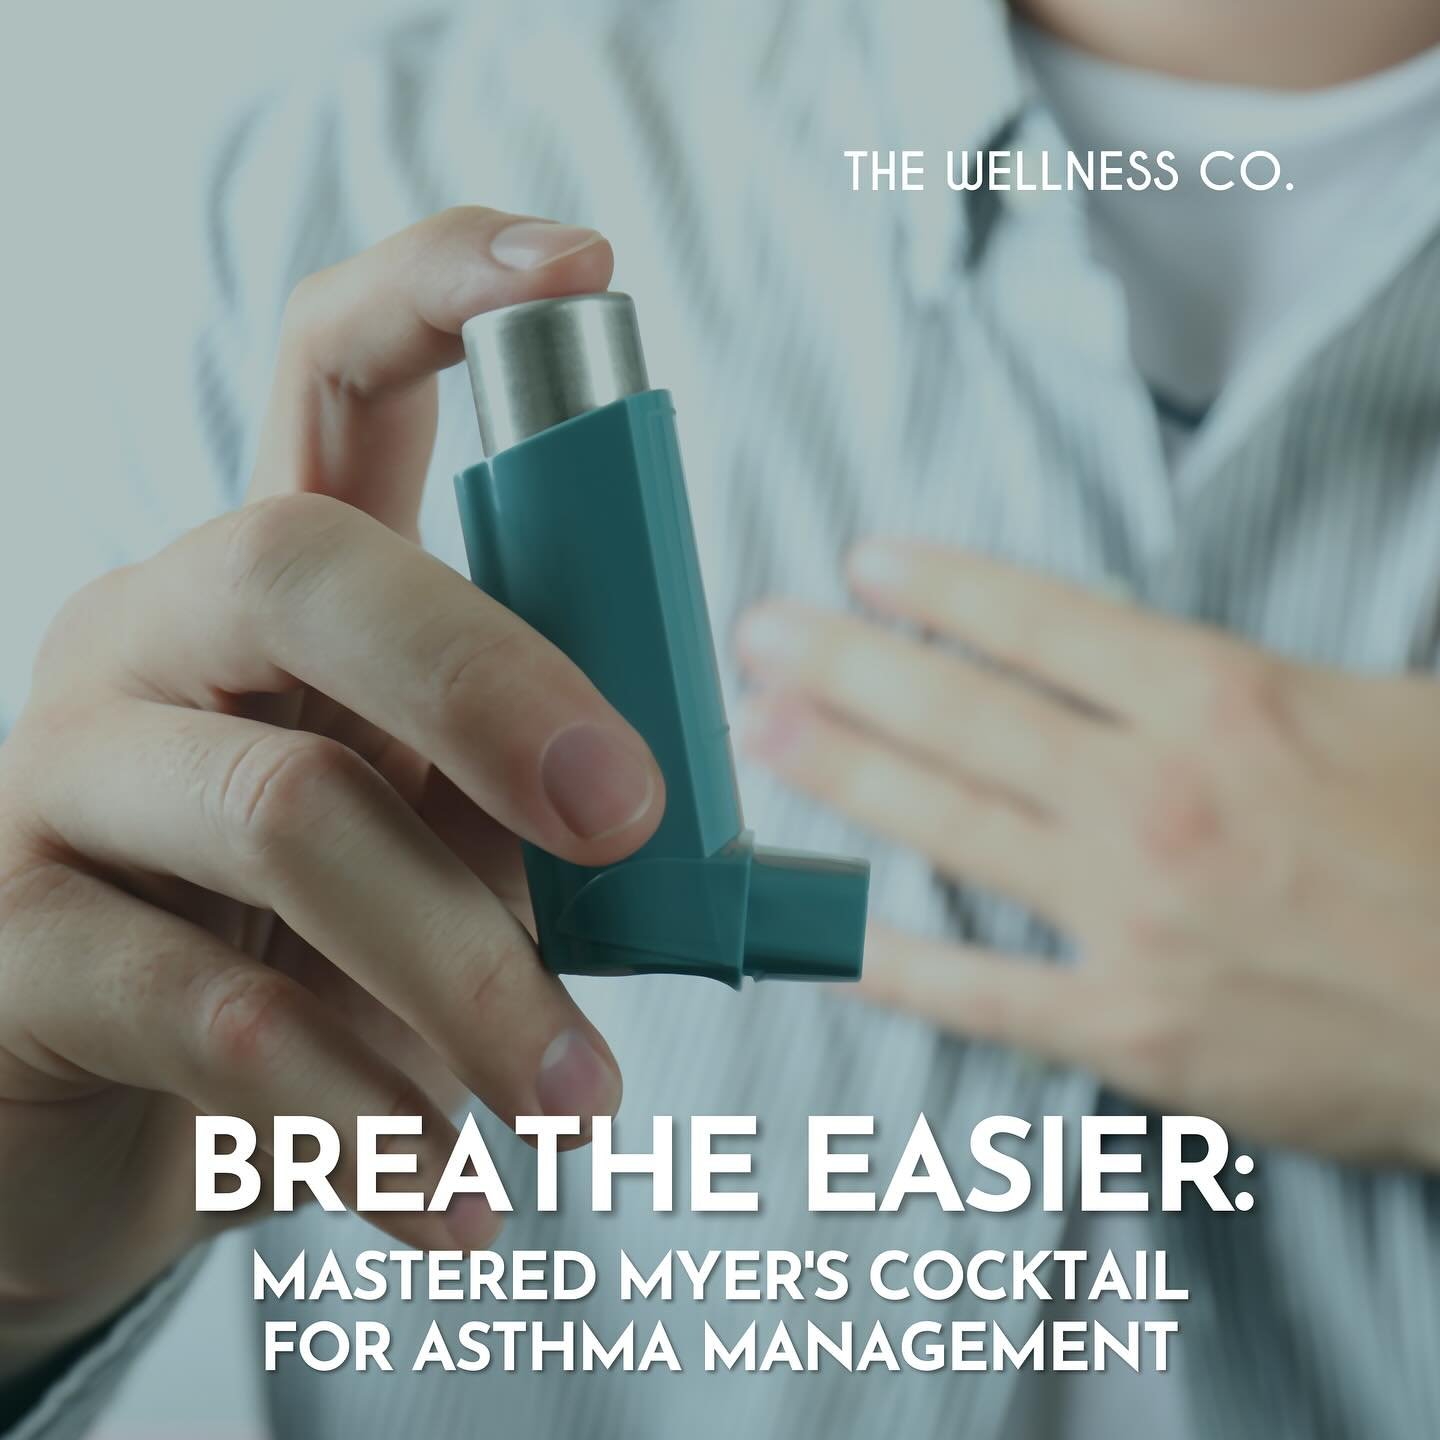 Struggling to find effective relief for your asthma? Explore the breakthrough solution of Mastered Myer&rsquo;s Cocktail. 

Packed with ingredients like magnesium, B vitamins, and vitamin C, Mastered Myer&rsquo;s Cocktail is a specialised IV Drip The